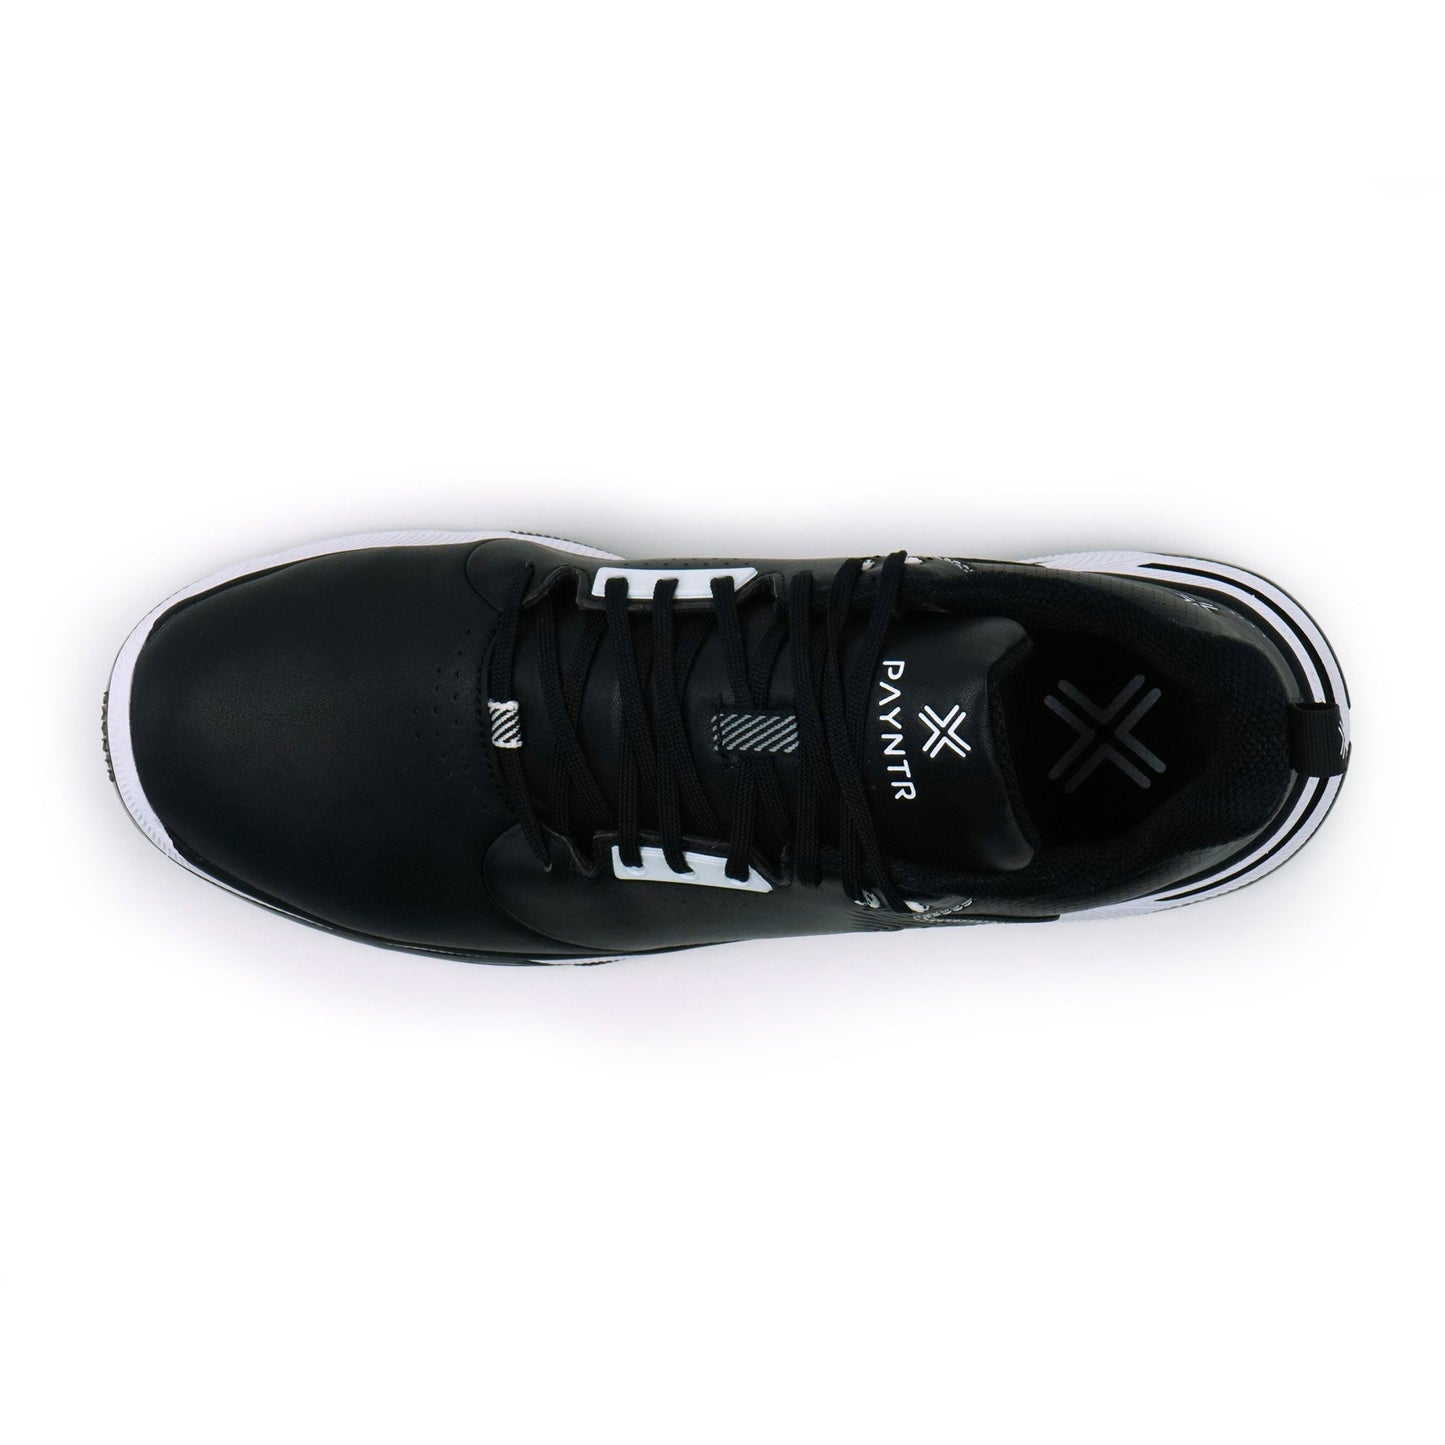 PAYNTR X-006 RS Spiked Golf Shoe (Black) - Top